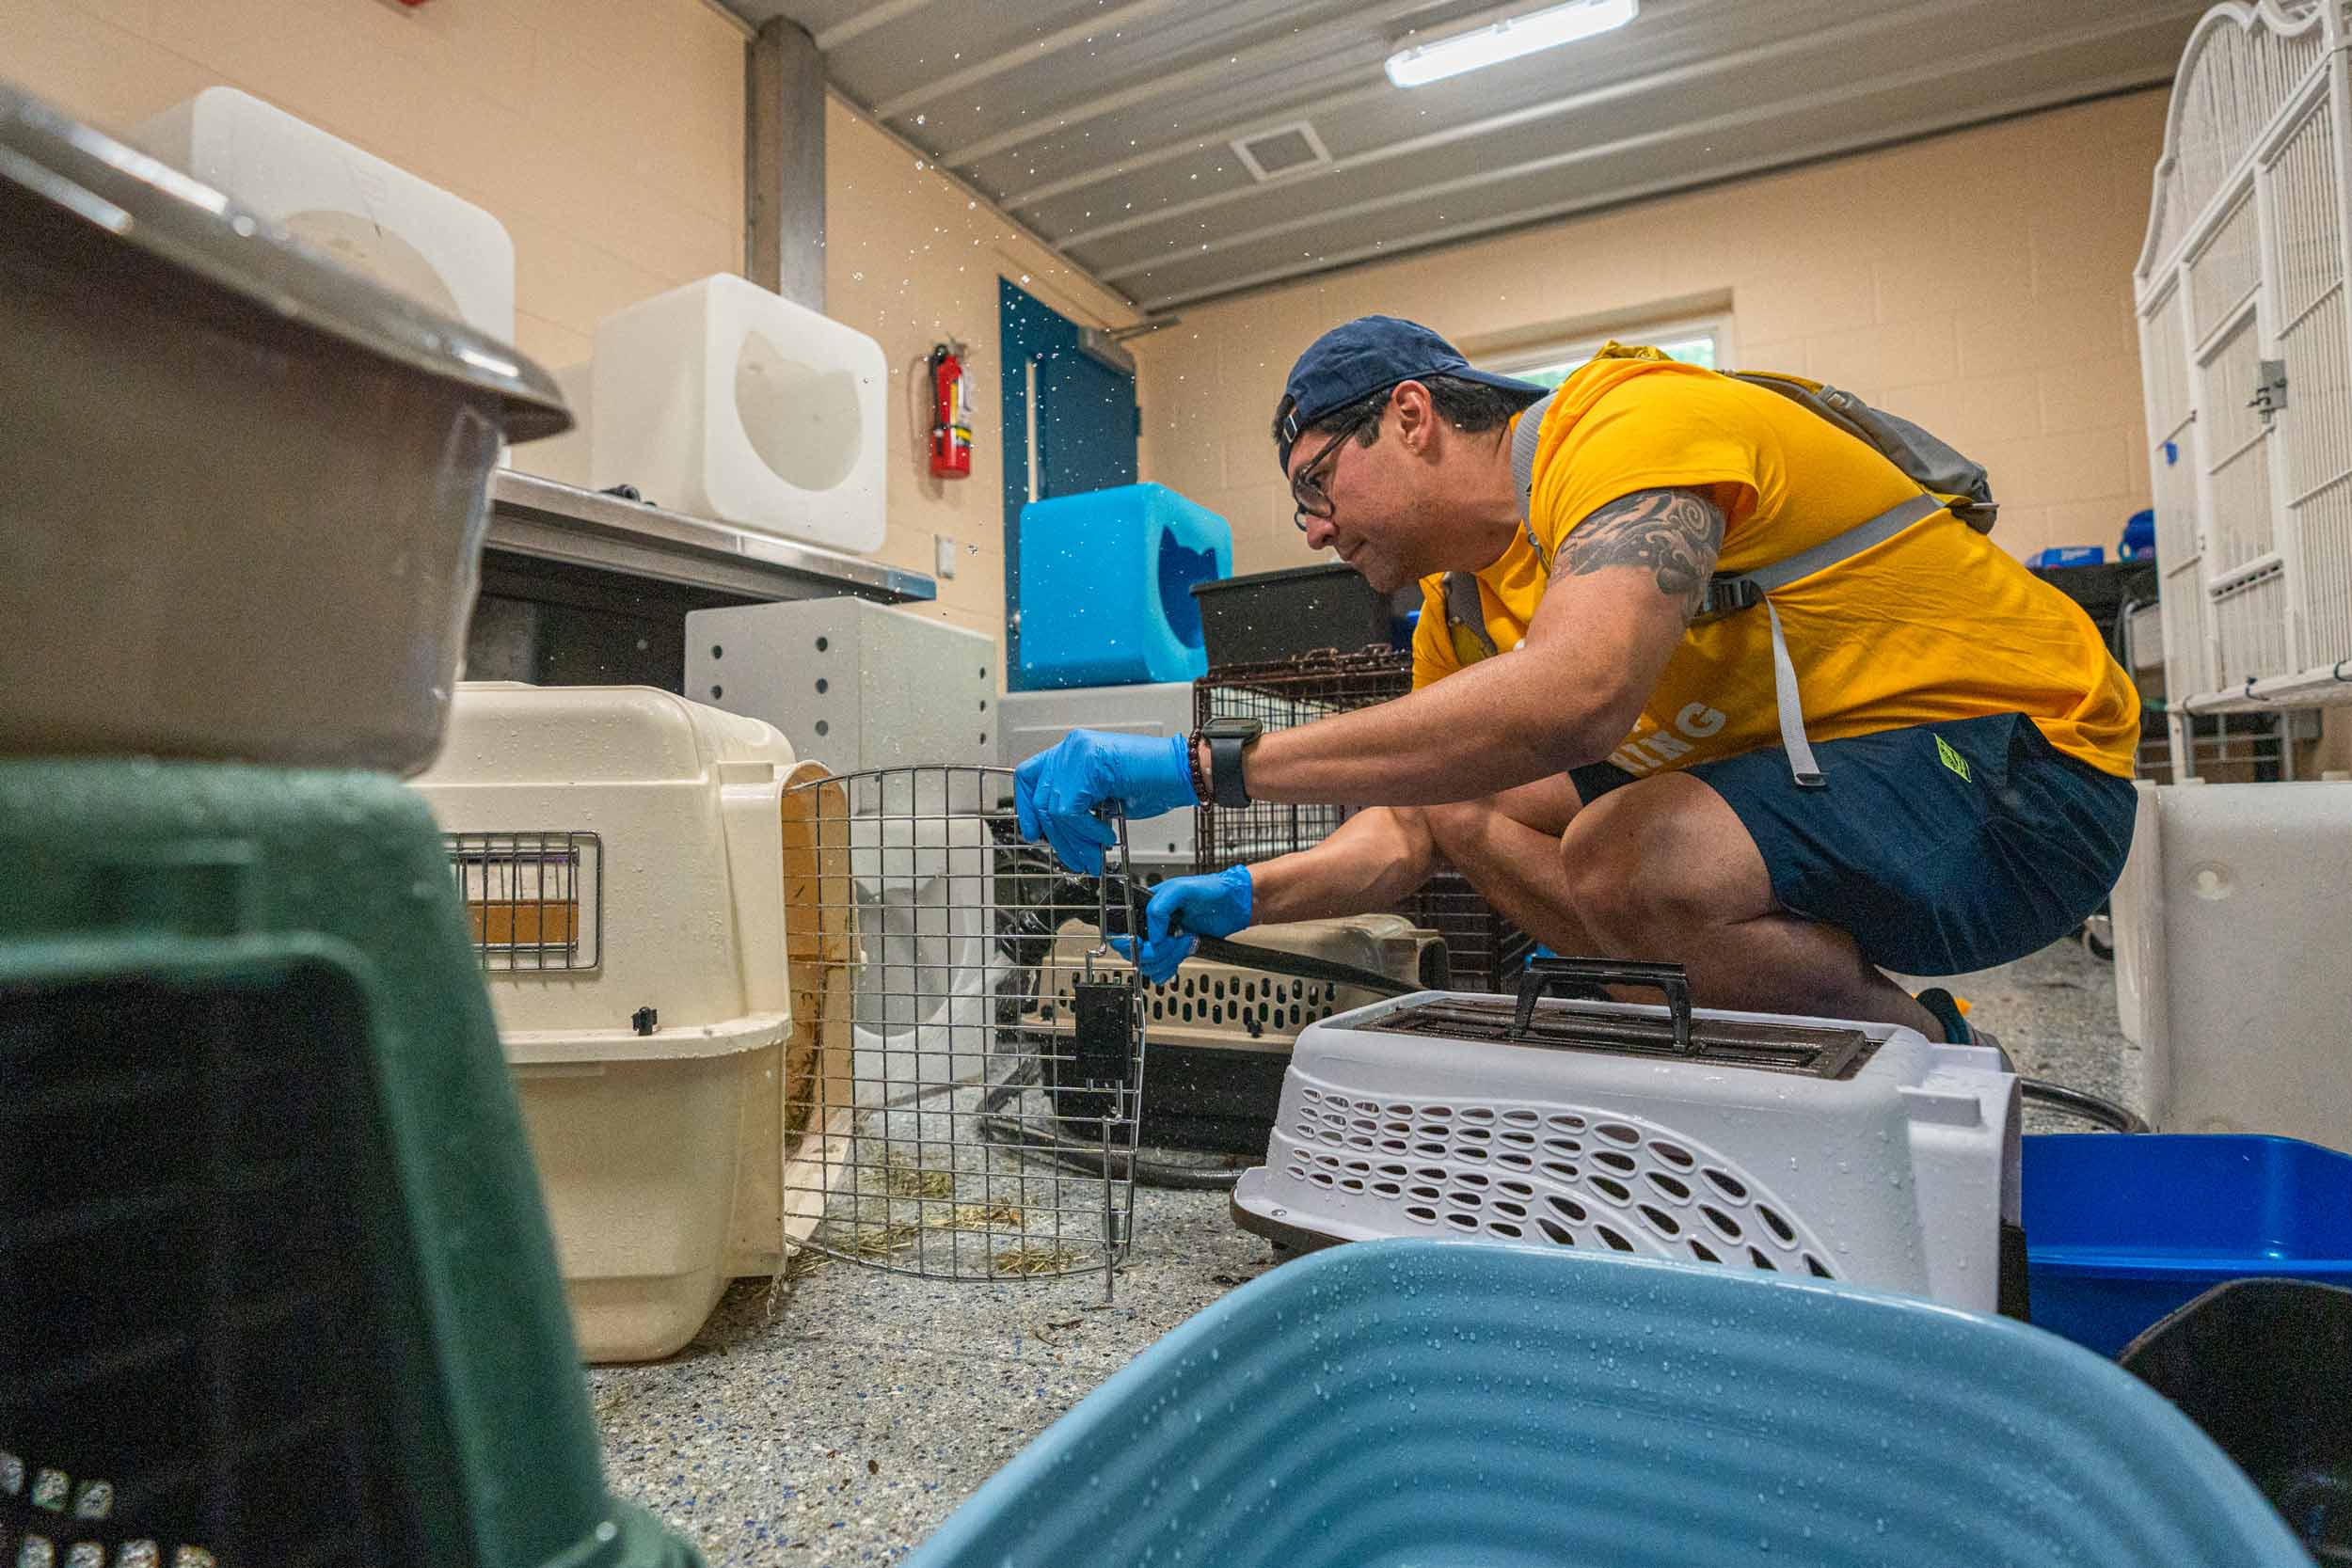 IT Services helps out at the SPCA